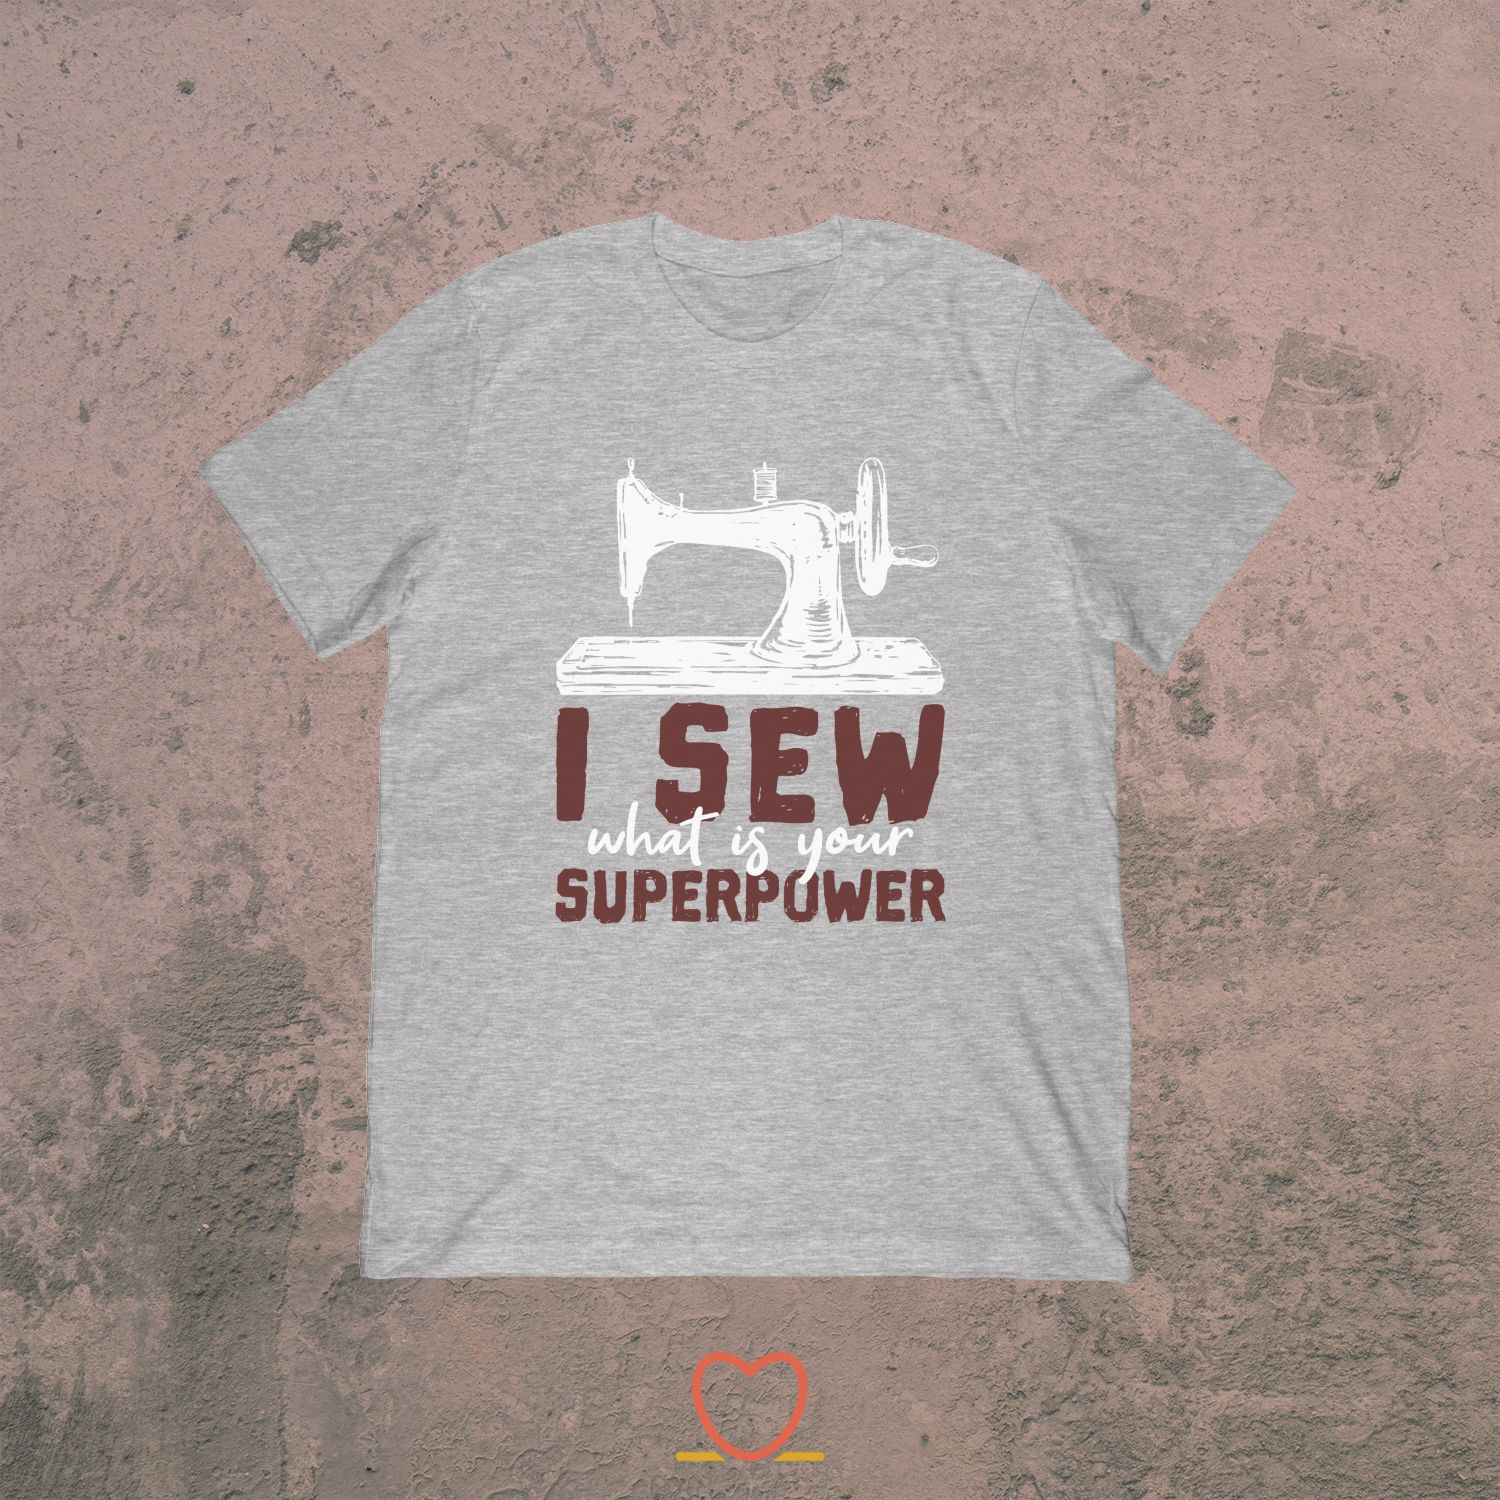 I Sew What Is Your Superpower – I Sew Tee